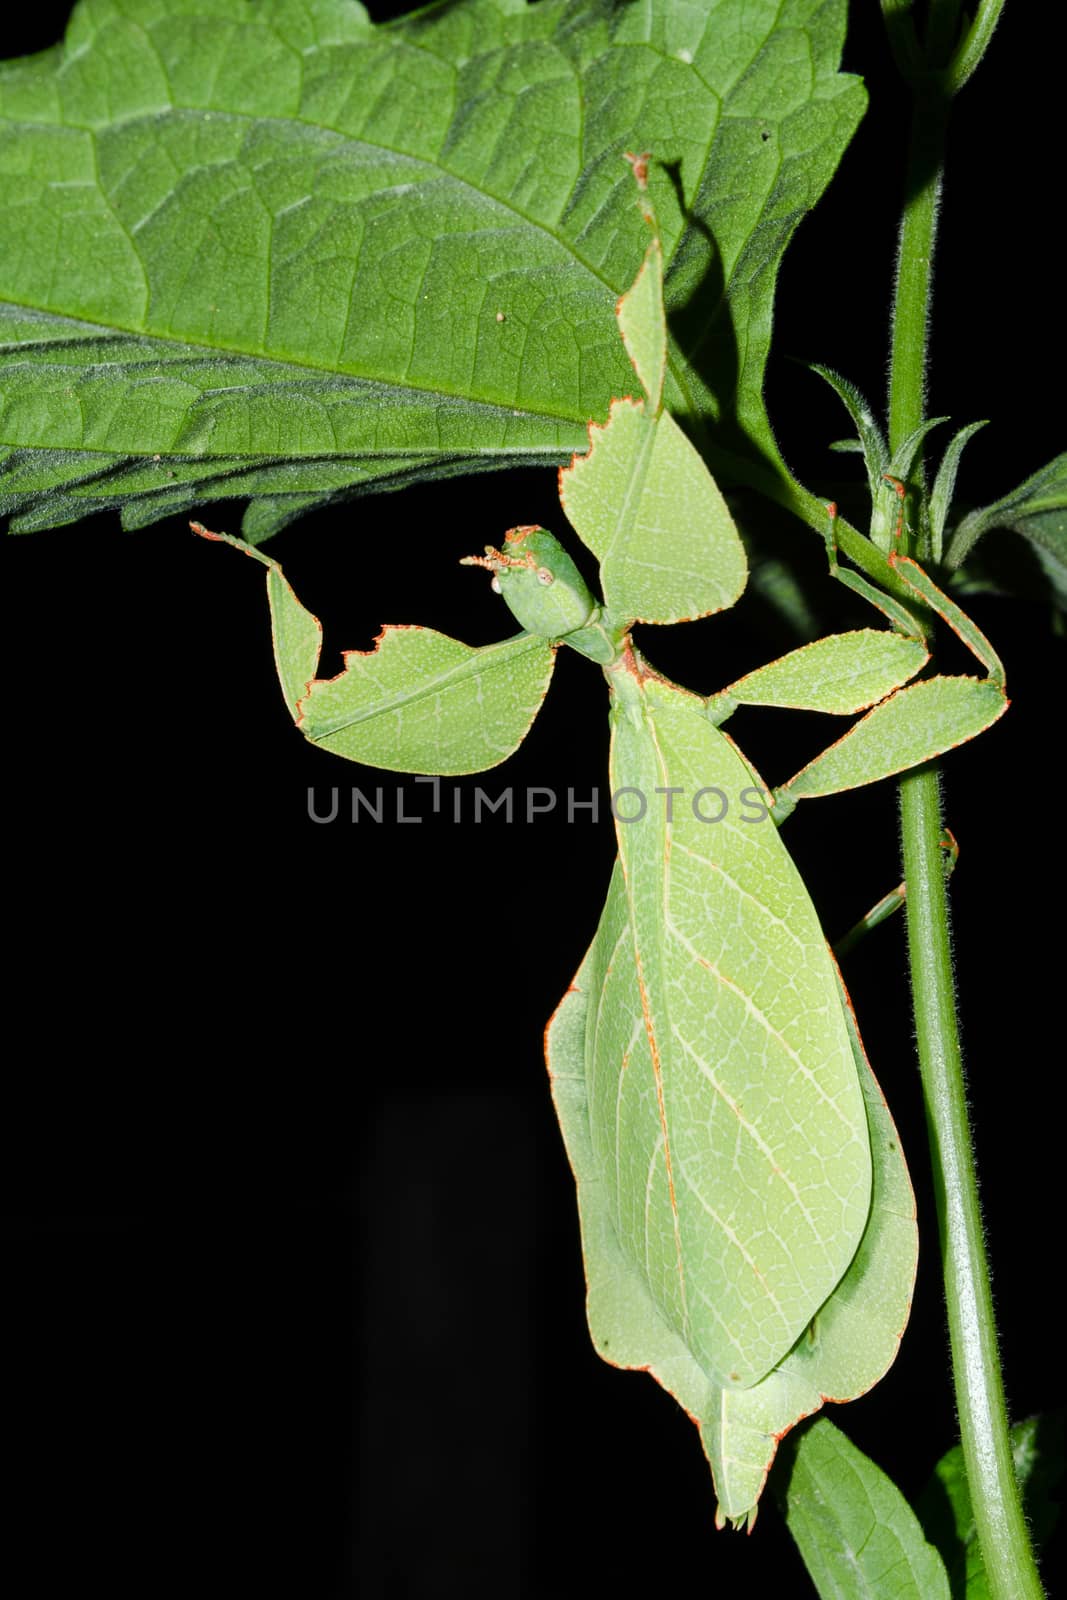 Phyllium bioculatum have extremely flattened, irregularly shaped bodies, wings, and legs.